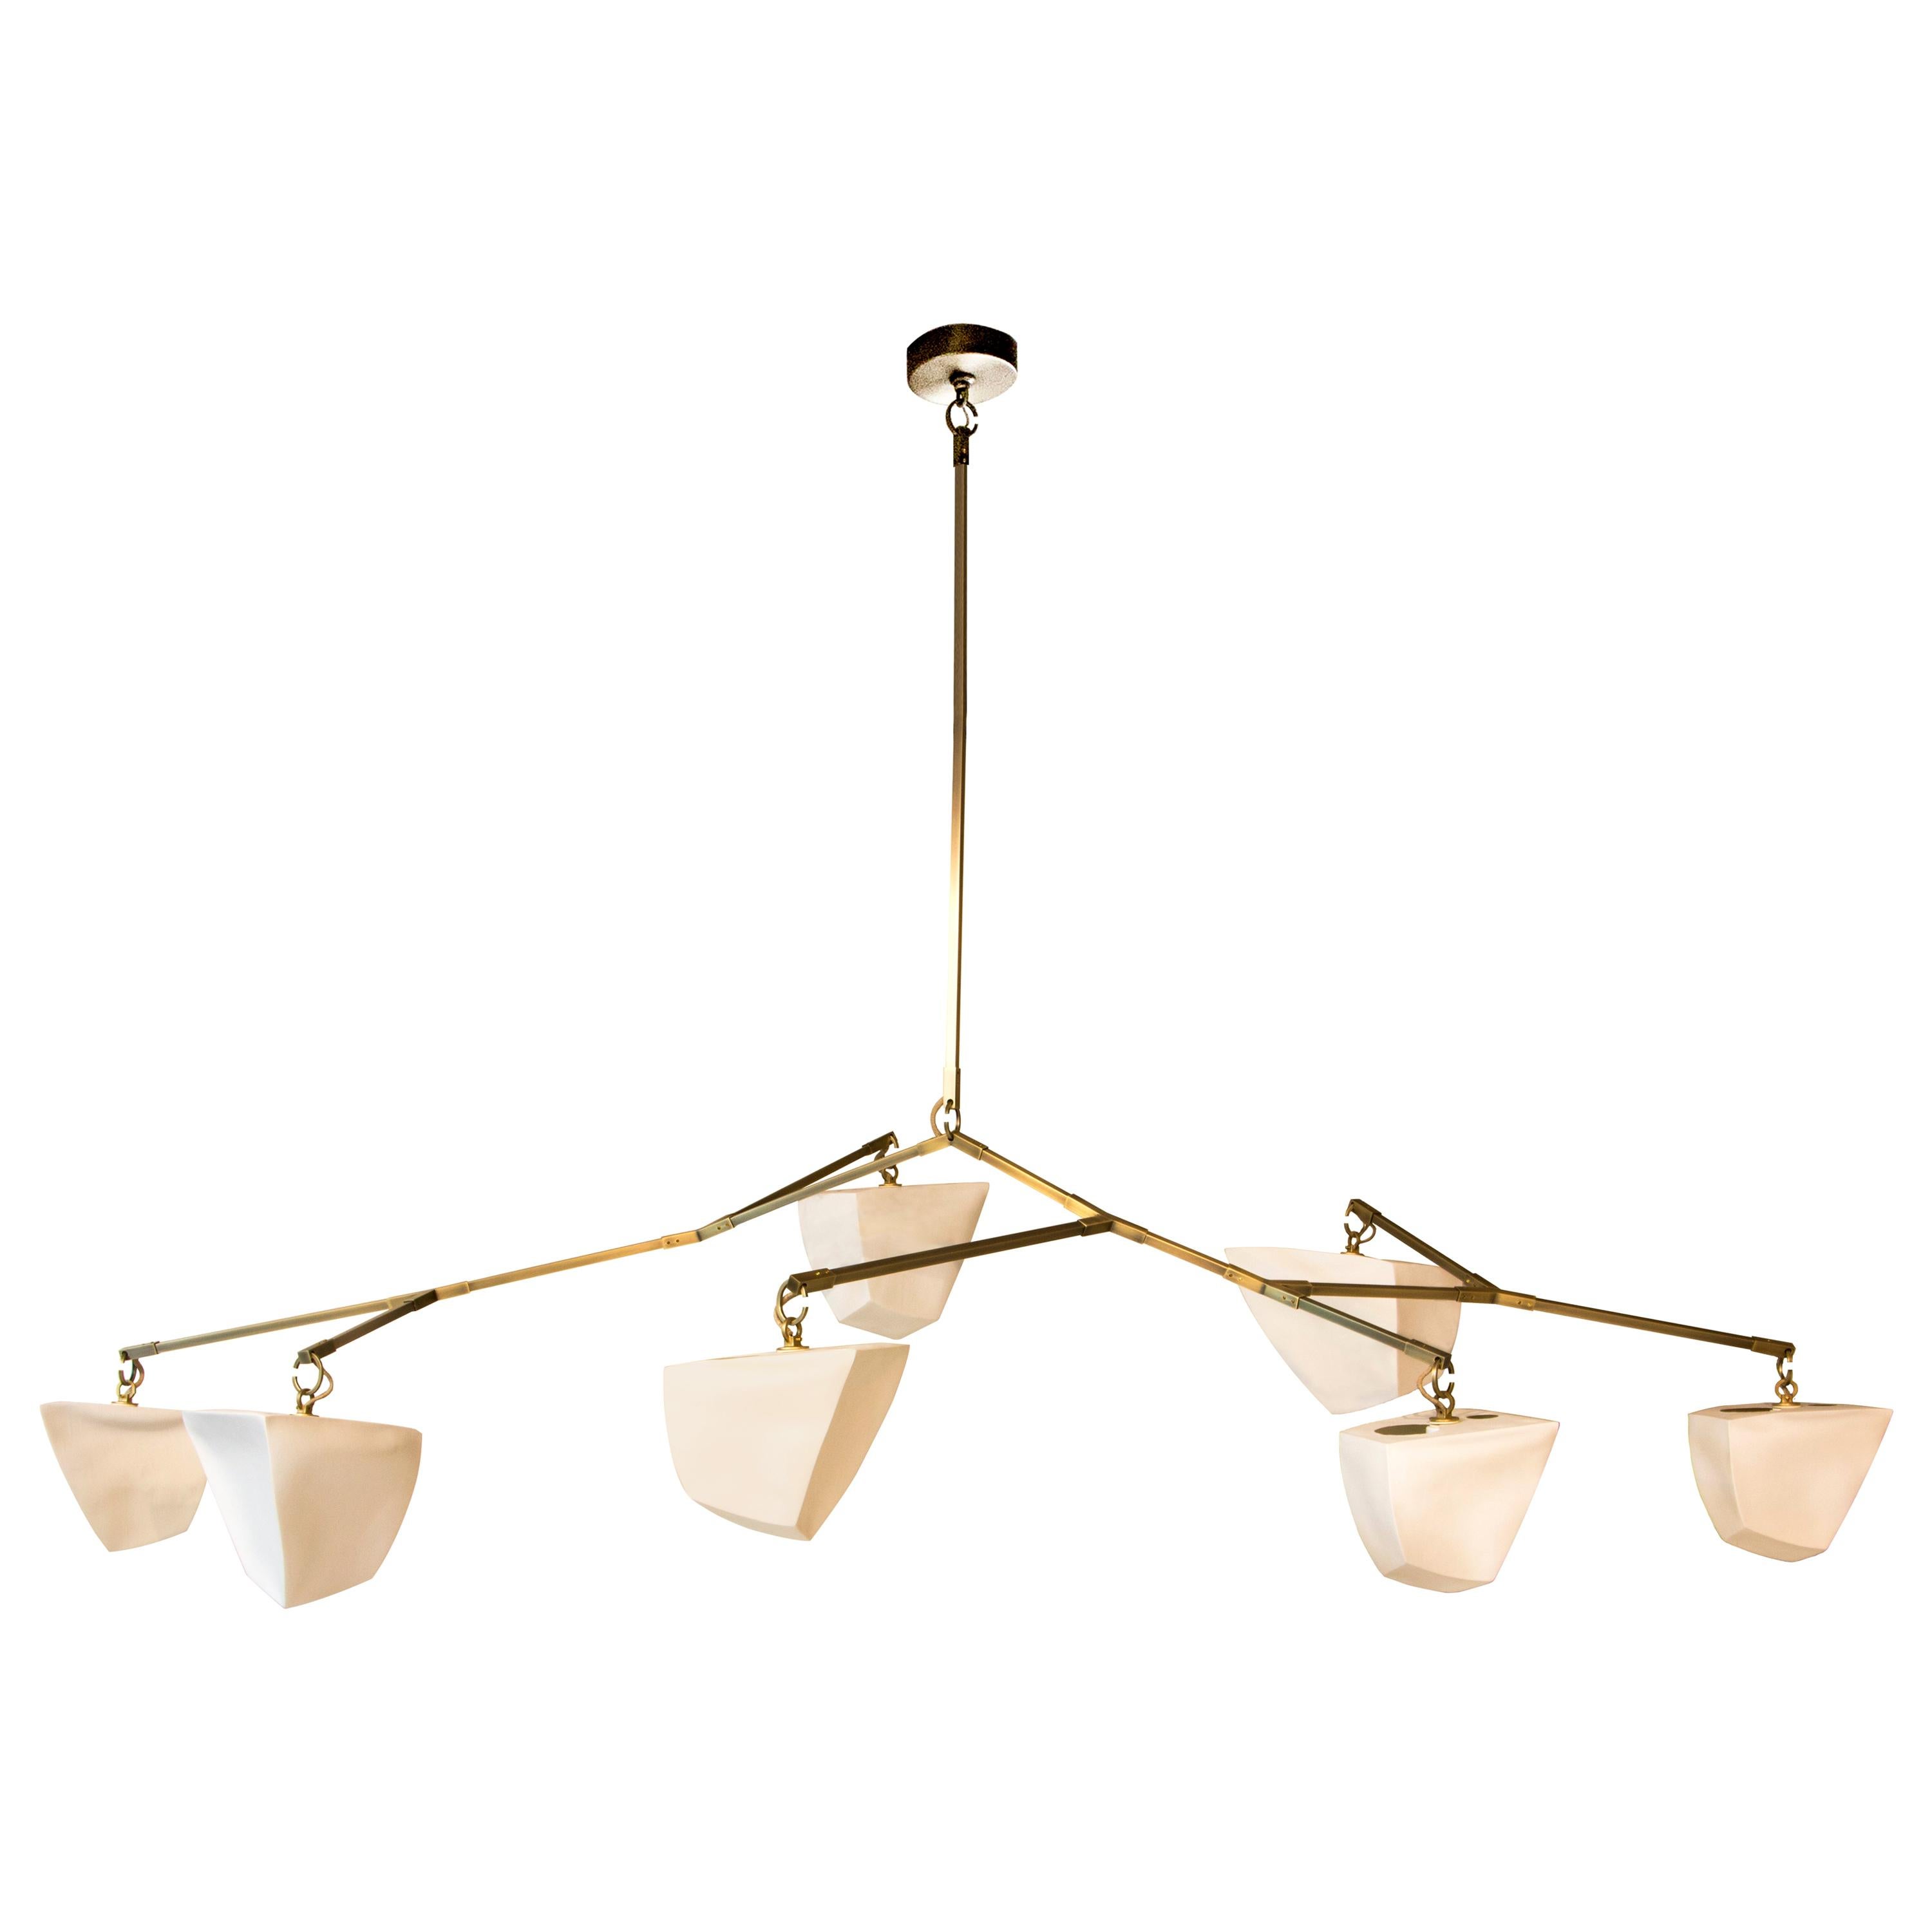 Porcelain Cassiopeia 7 V1: Mobile Chandelier, handmade by Andrea Claire Studio